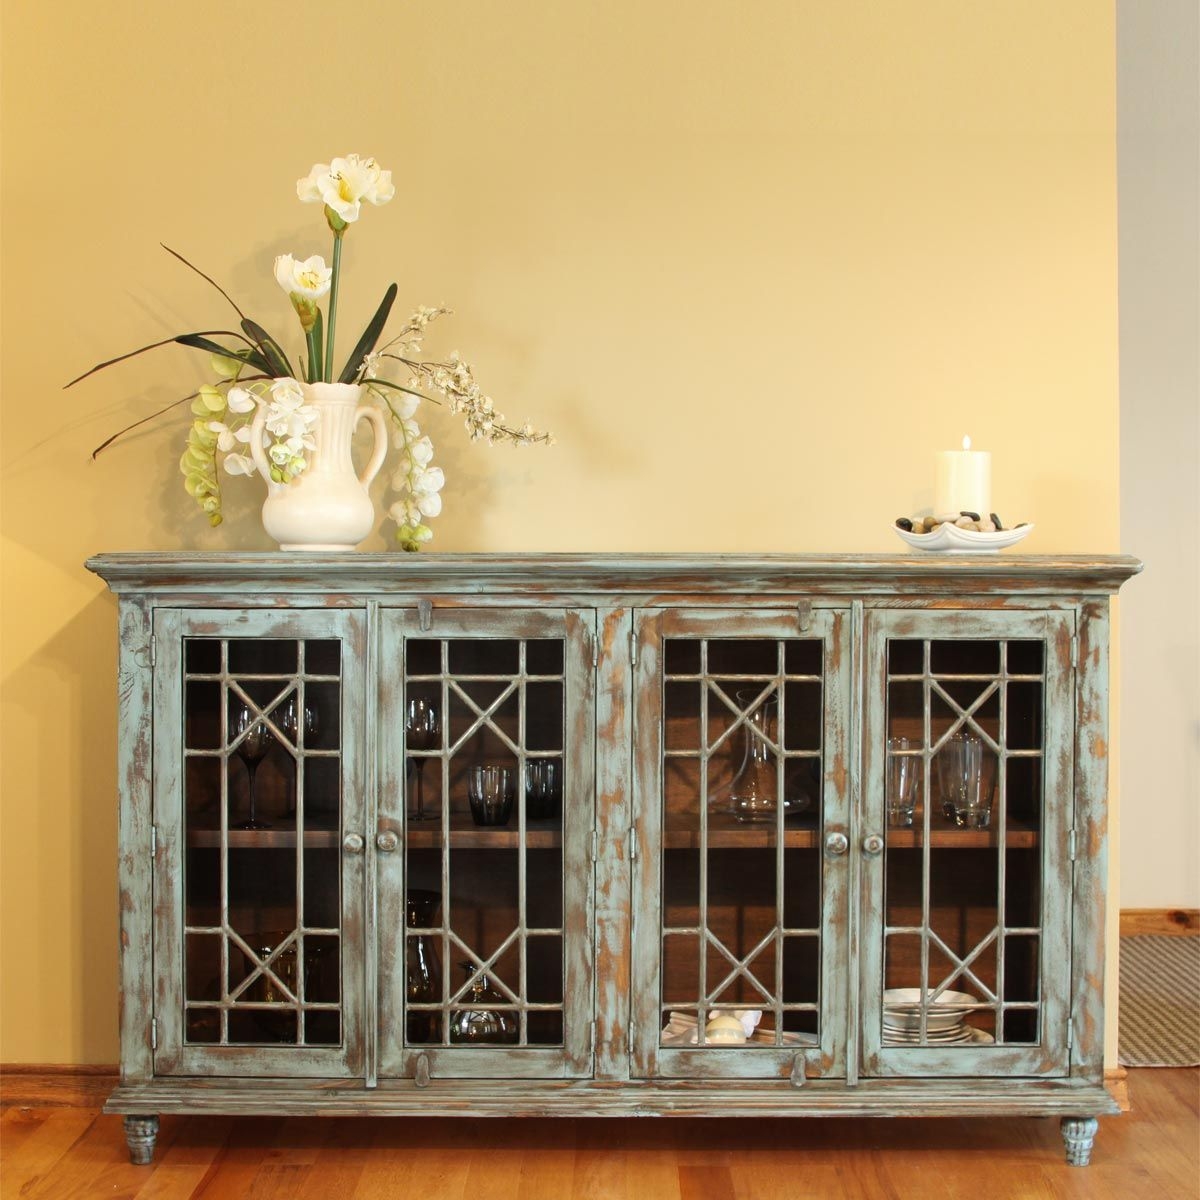 Love this rustic curio cabinet could also serve as a